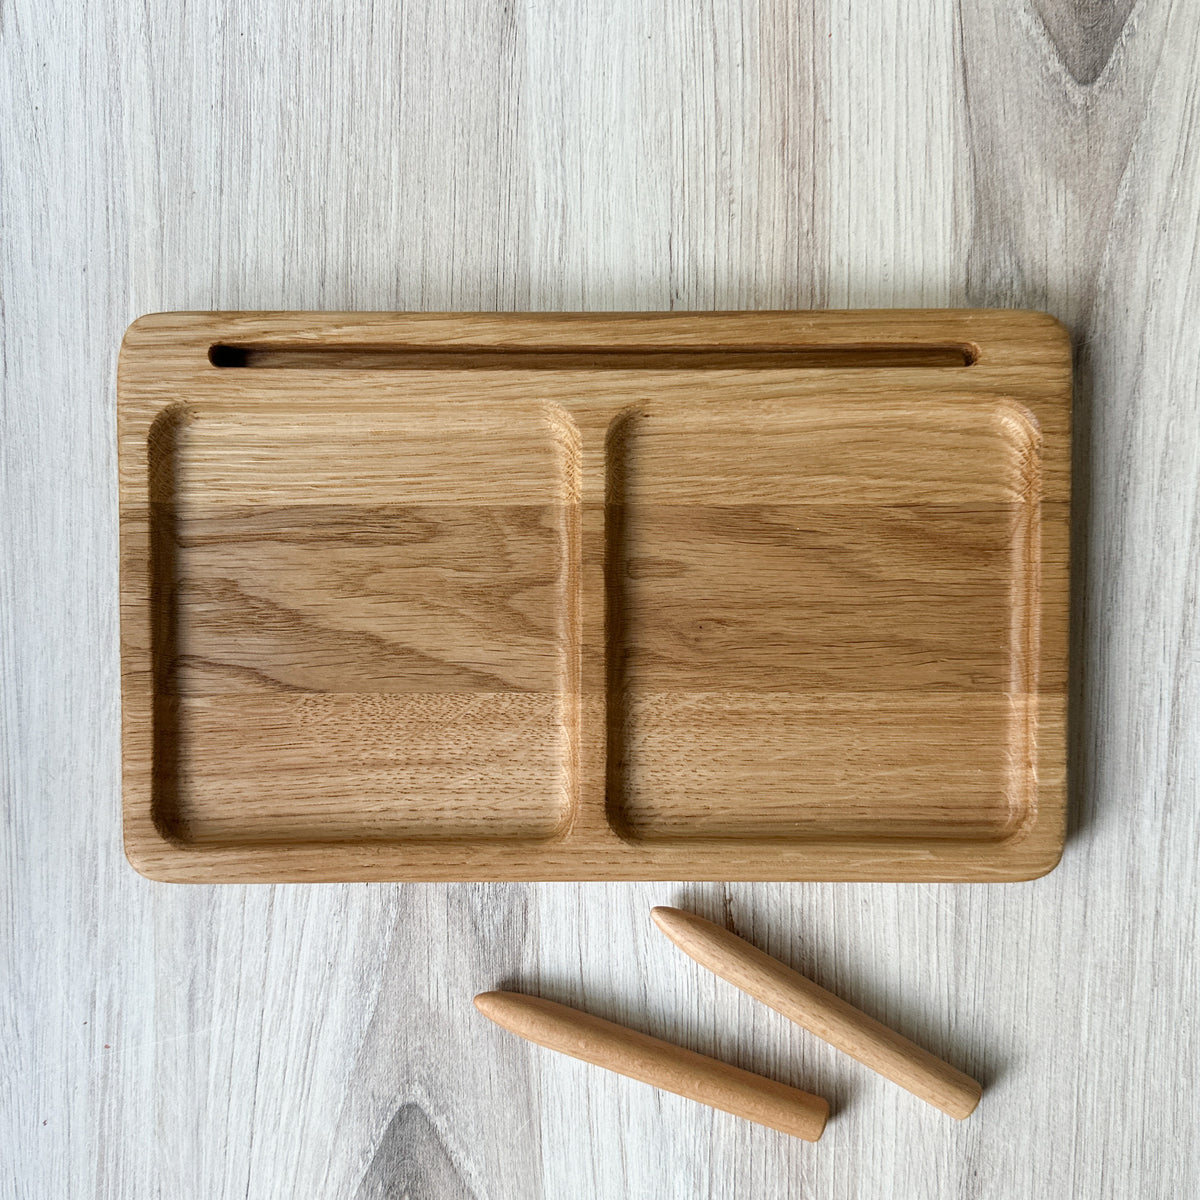  TOVINANNA Teaching Aid Tray Bathroom Tray Kid Sand Trays  Breakfast Trays Art Trays for Kids Montessori Trays for Toddlers Toy  Sorting Tray Tray Coffee Table Wood Child Storage : Home 